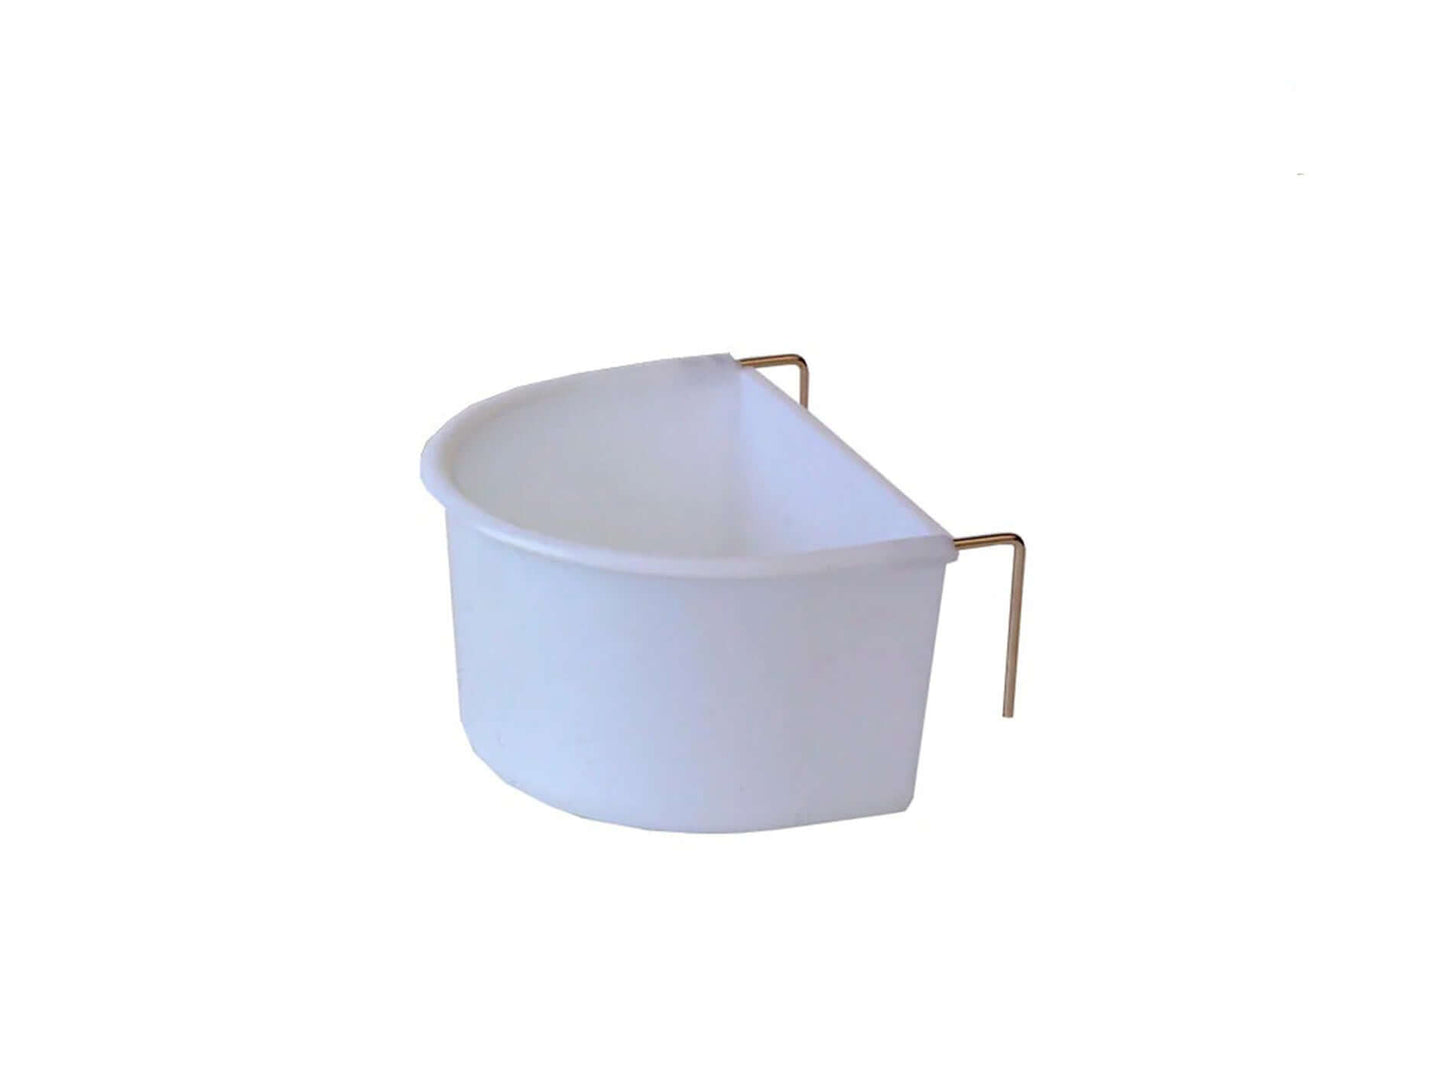 White plastic 2 hook drinker for cages. Two metal hooks to place through cage or aviary mesh